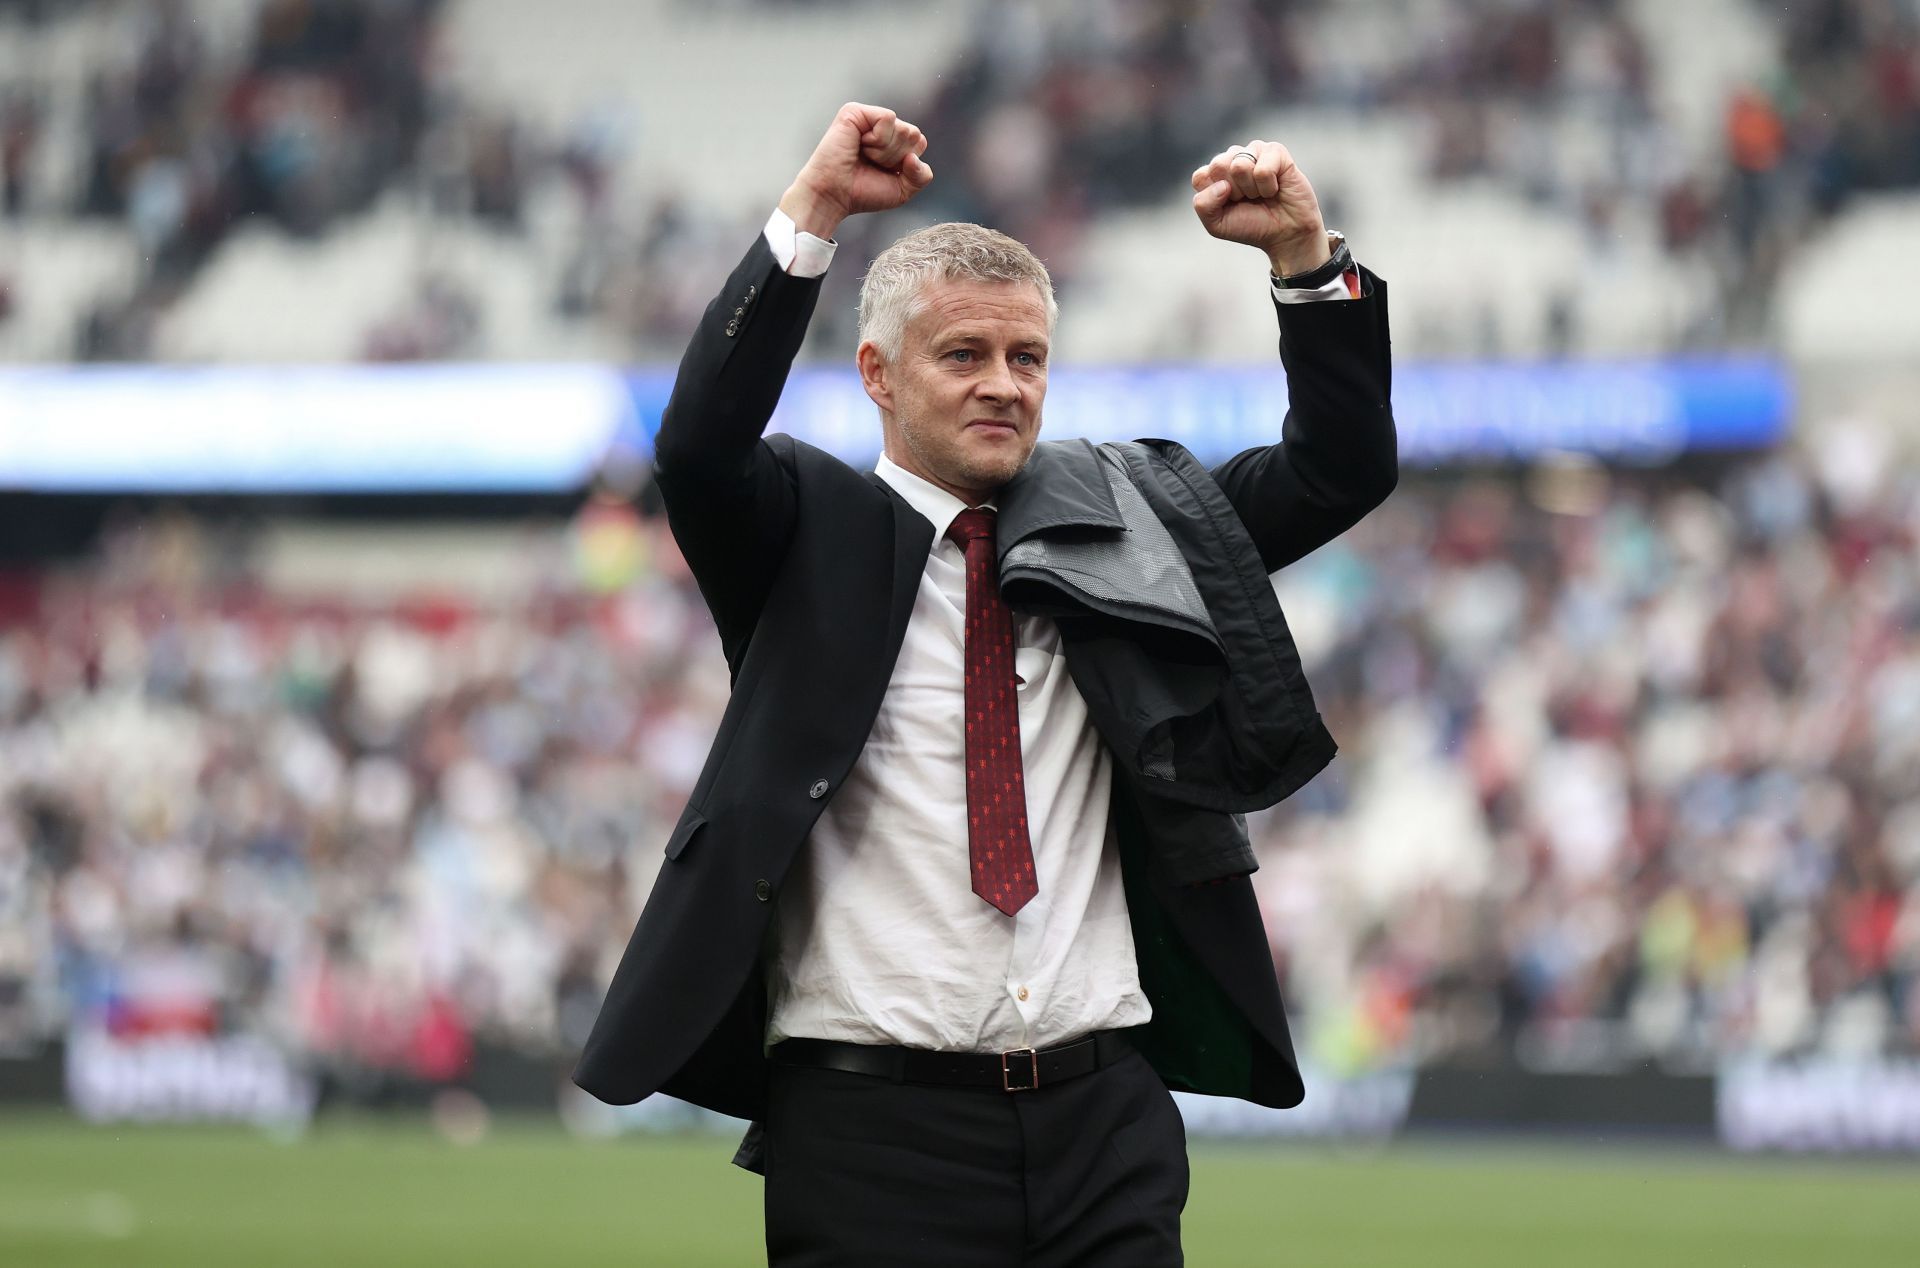 Can Ole Gunnar Solskjaer inspire Manchester United to beat their neighbors this afternoon?